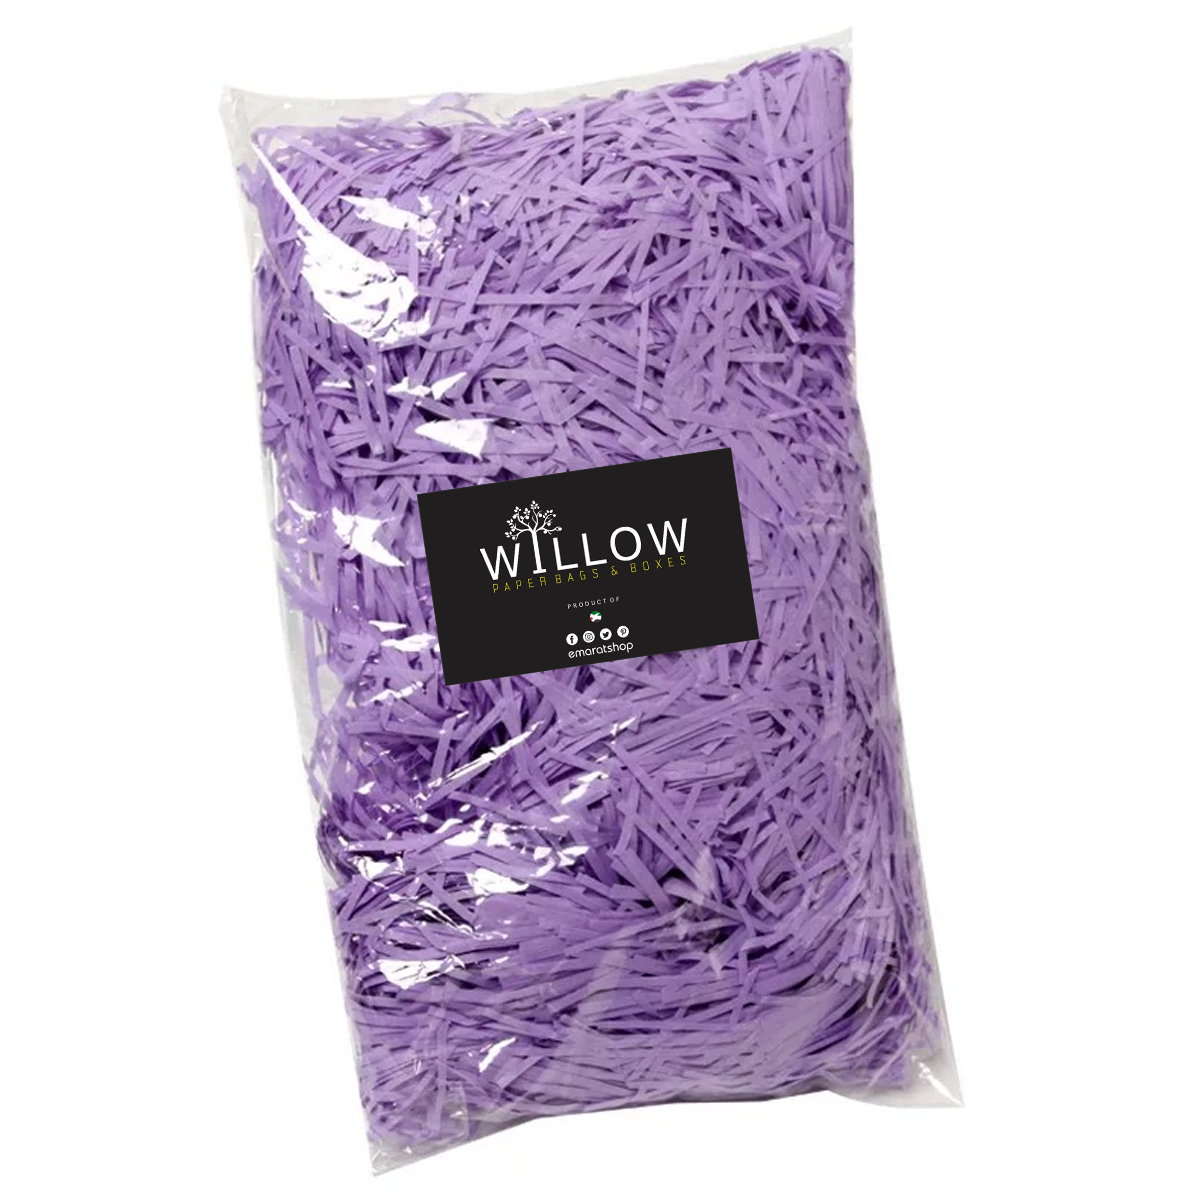 100g/Bag Professional laser Paper Cut Shredded Crinkle Filling Paper Confetti For Packing - YELLOW